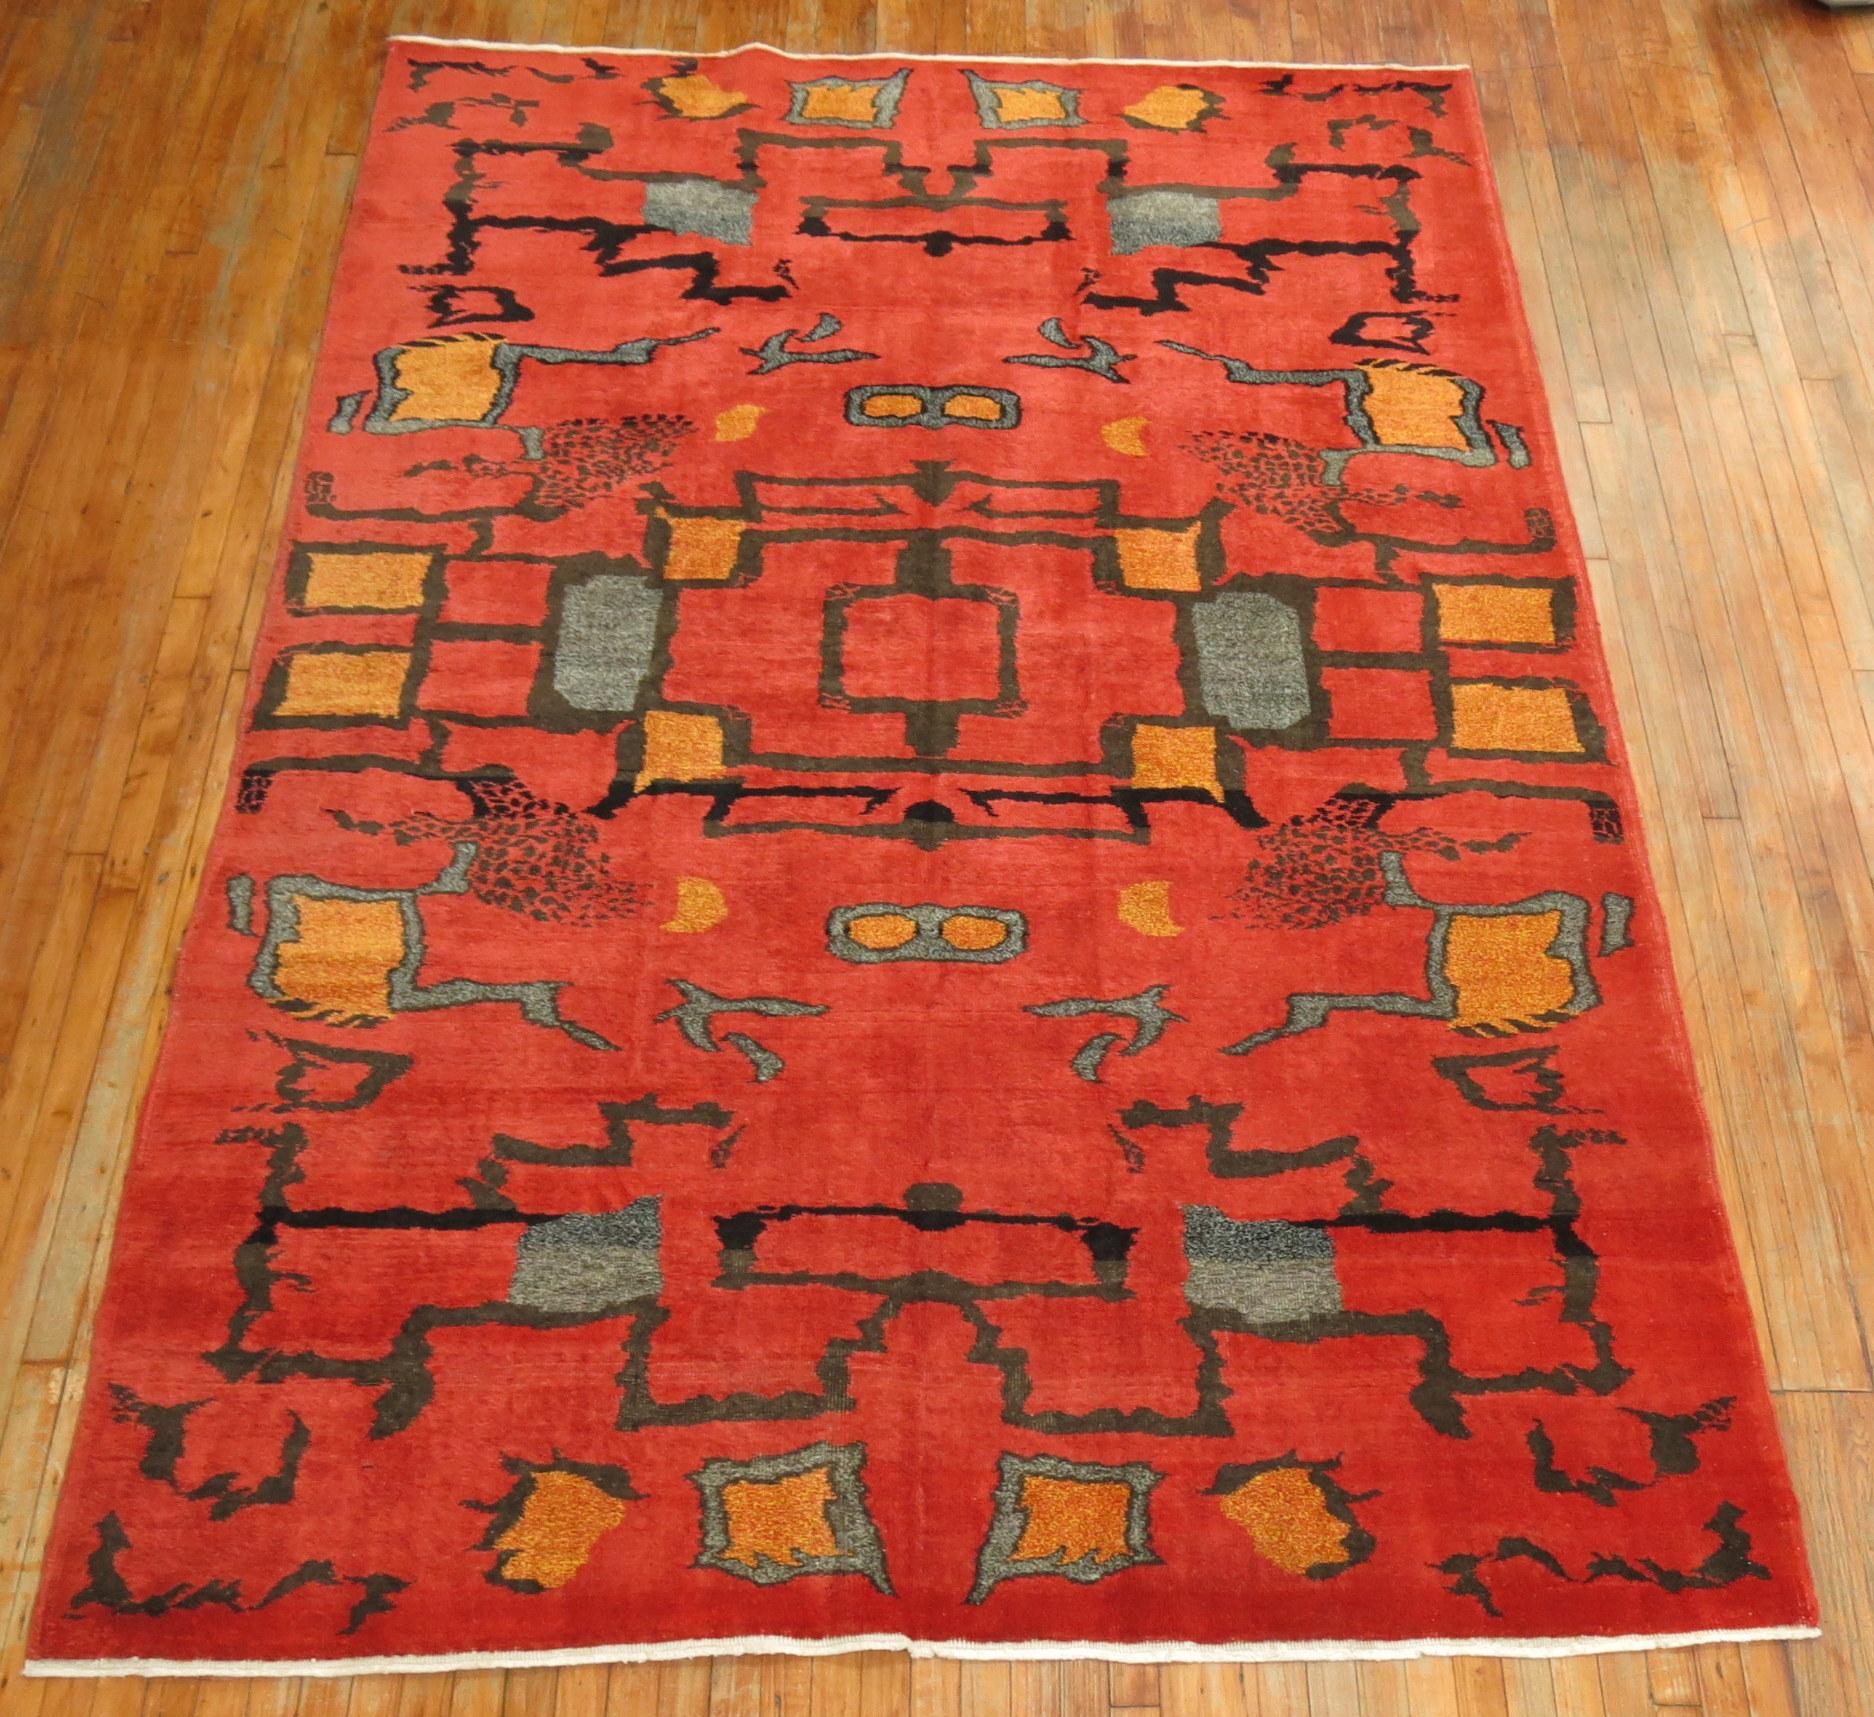 A one of a kind mid-20th century primitive Turkish Art Deco Inspired rug. Purchased from a boutique hotel in the old grand bazaar in Istanbul. A rug to enjoy.

Measures: 6'10